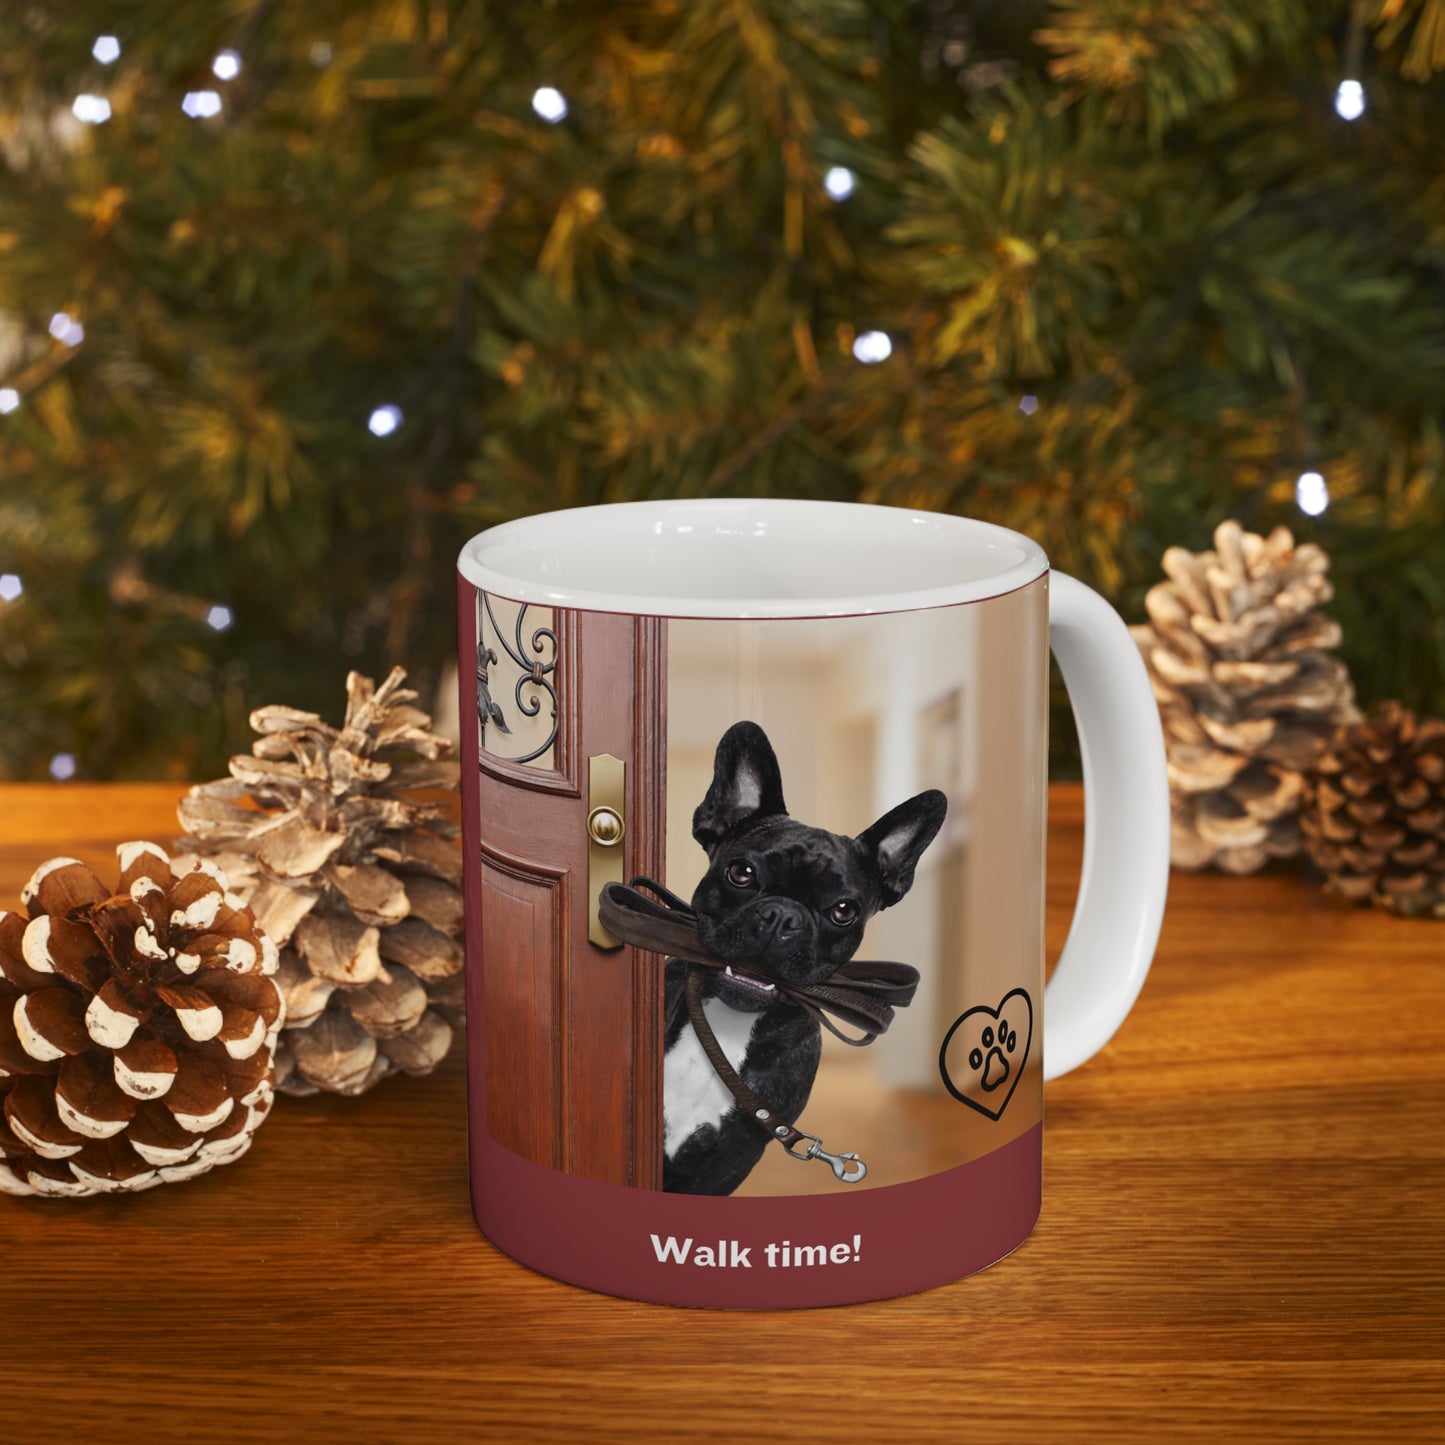 Great coffee mug for the doggie lover who understands they love them more than bacon and how much they look forward to their walks together. Dogs are truly awesome!